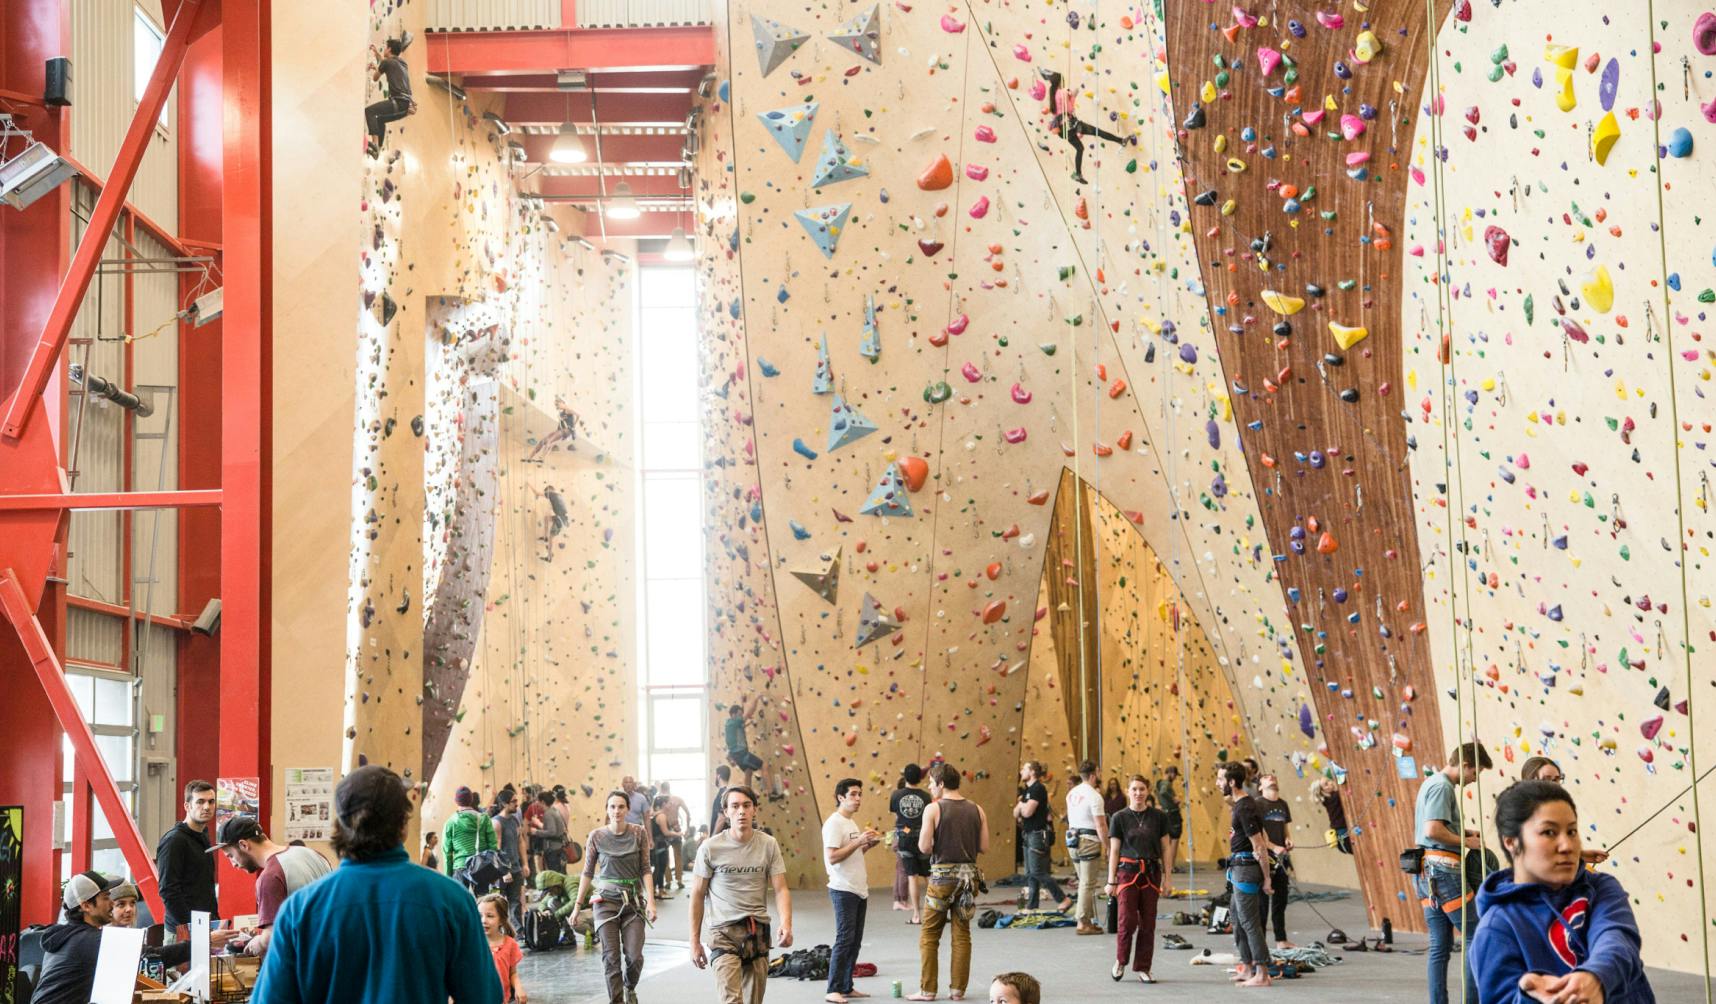 Indoor climbing gym full of people